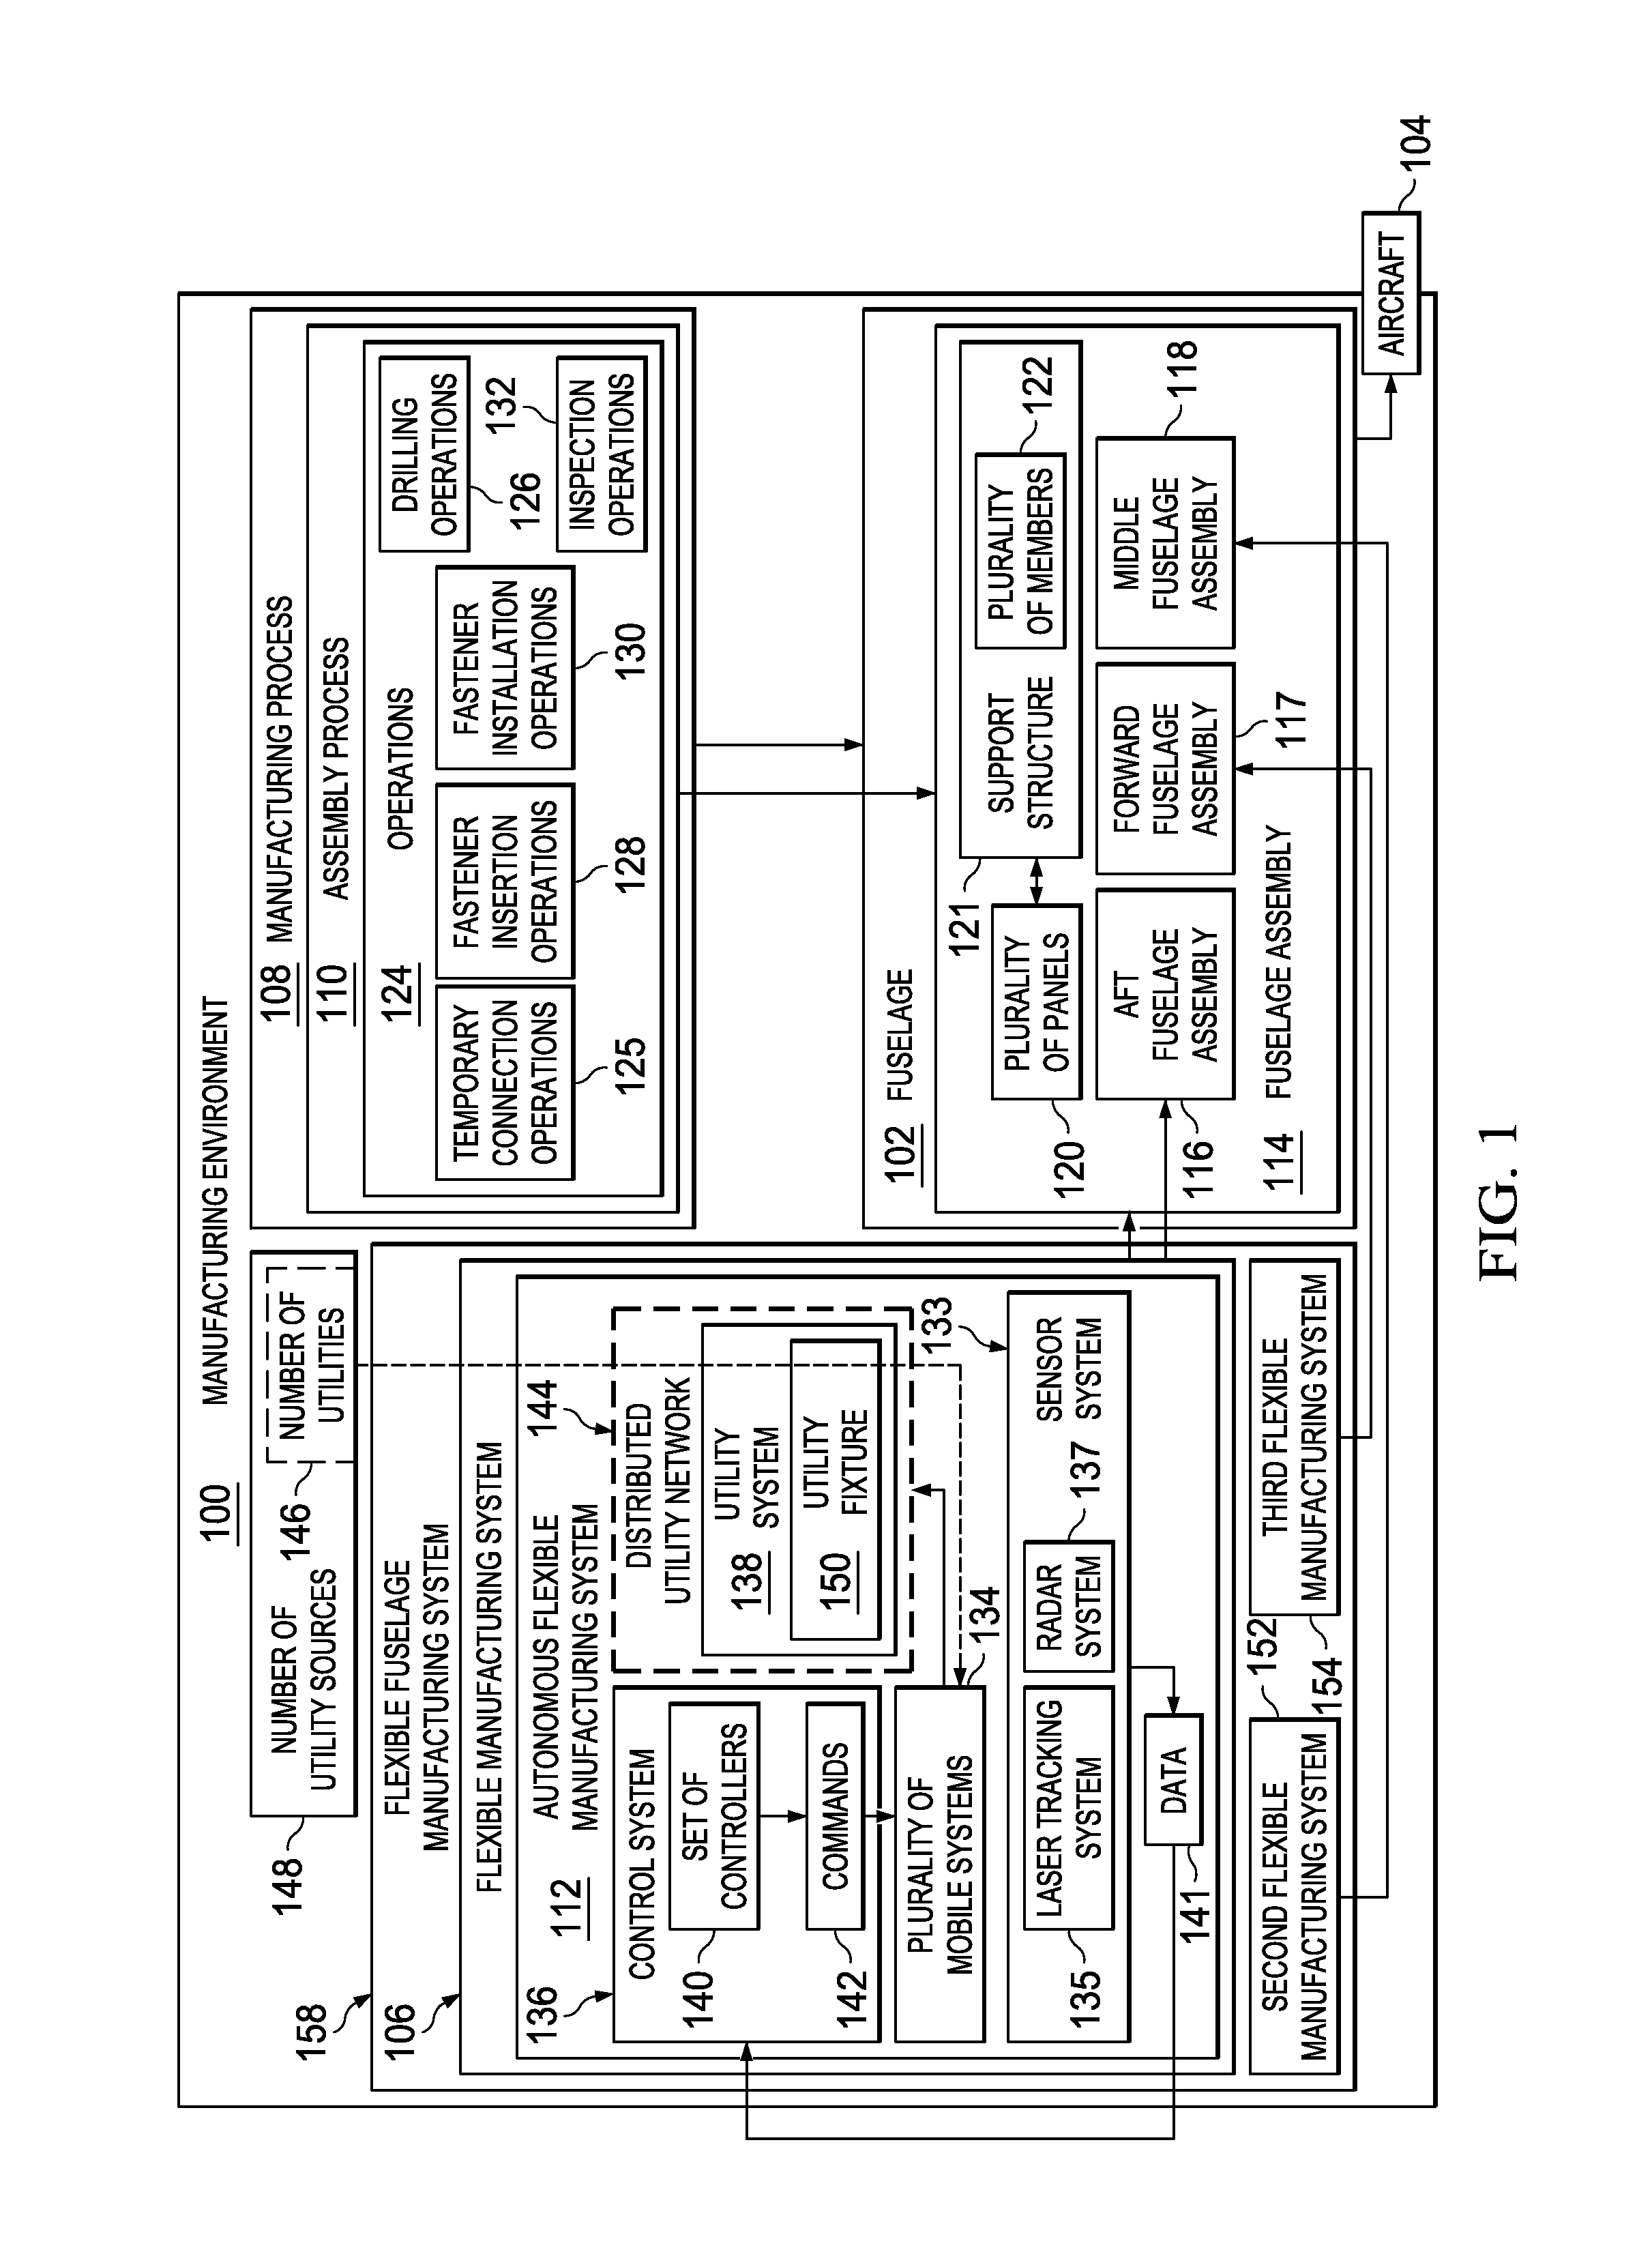 Metrology-Based System for Operating a Flexible Manufacturing System